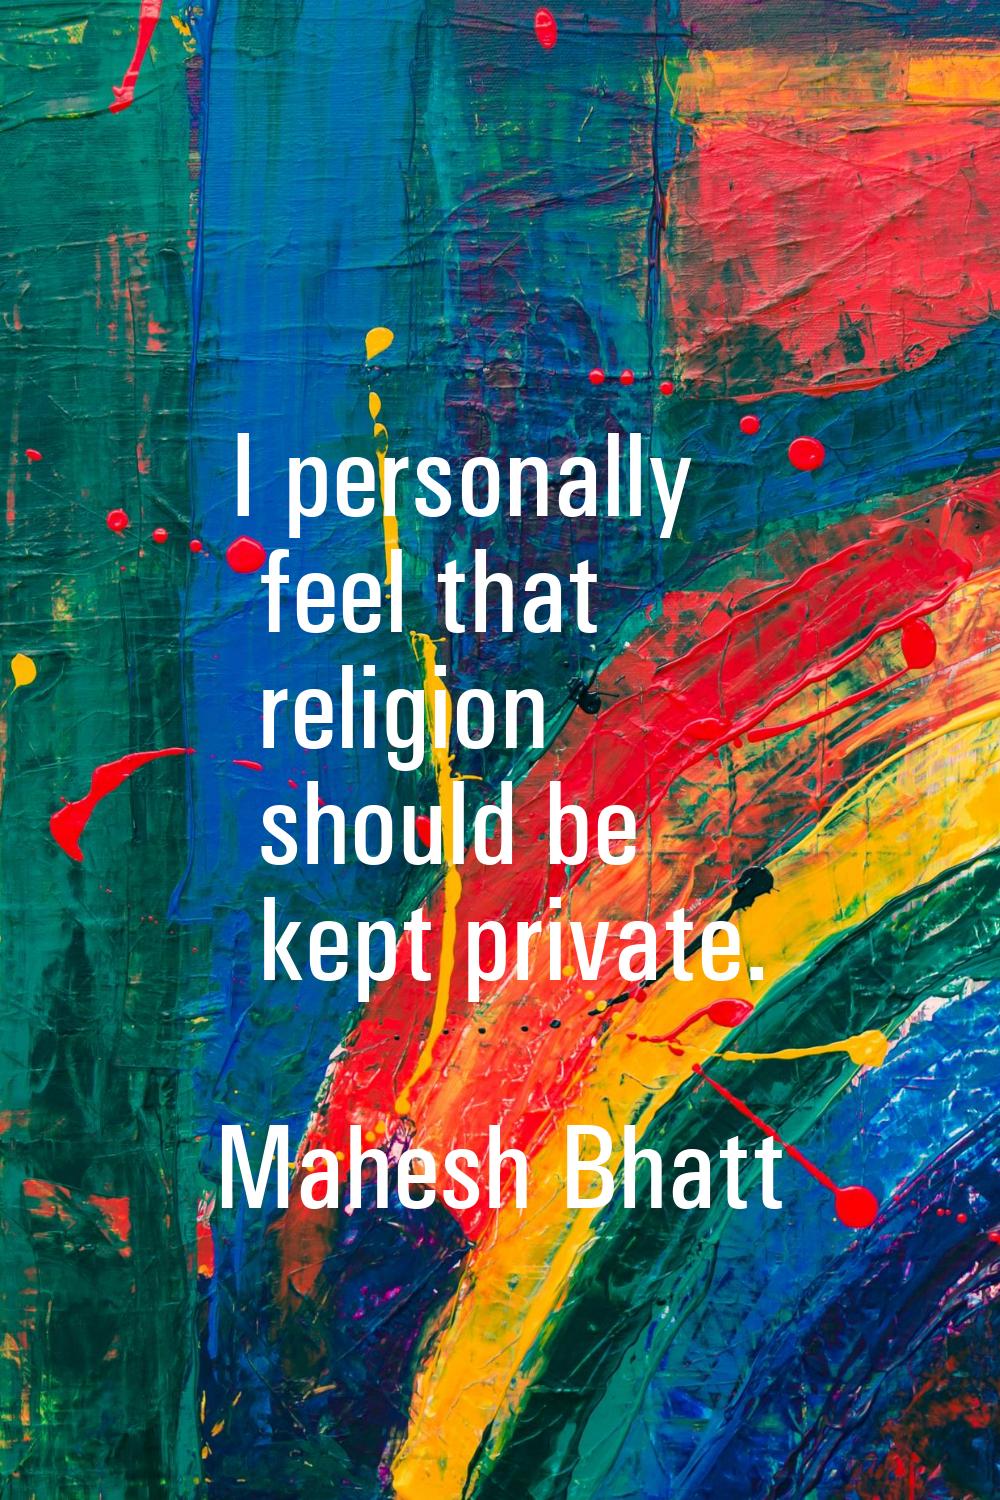 I personally feel that religion should be kept private.